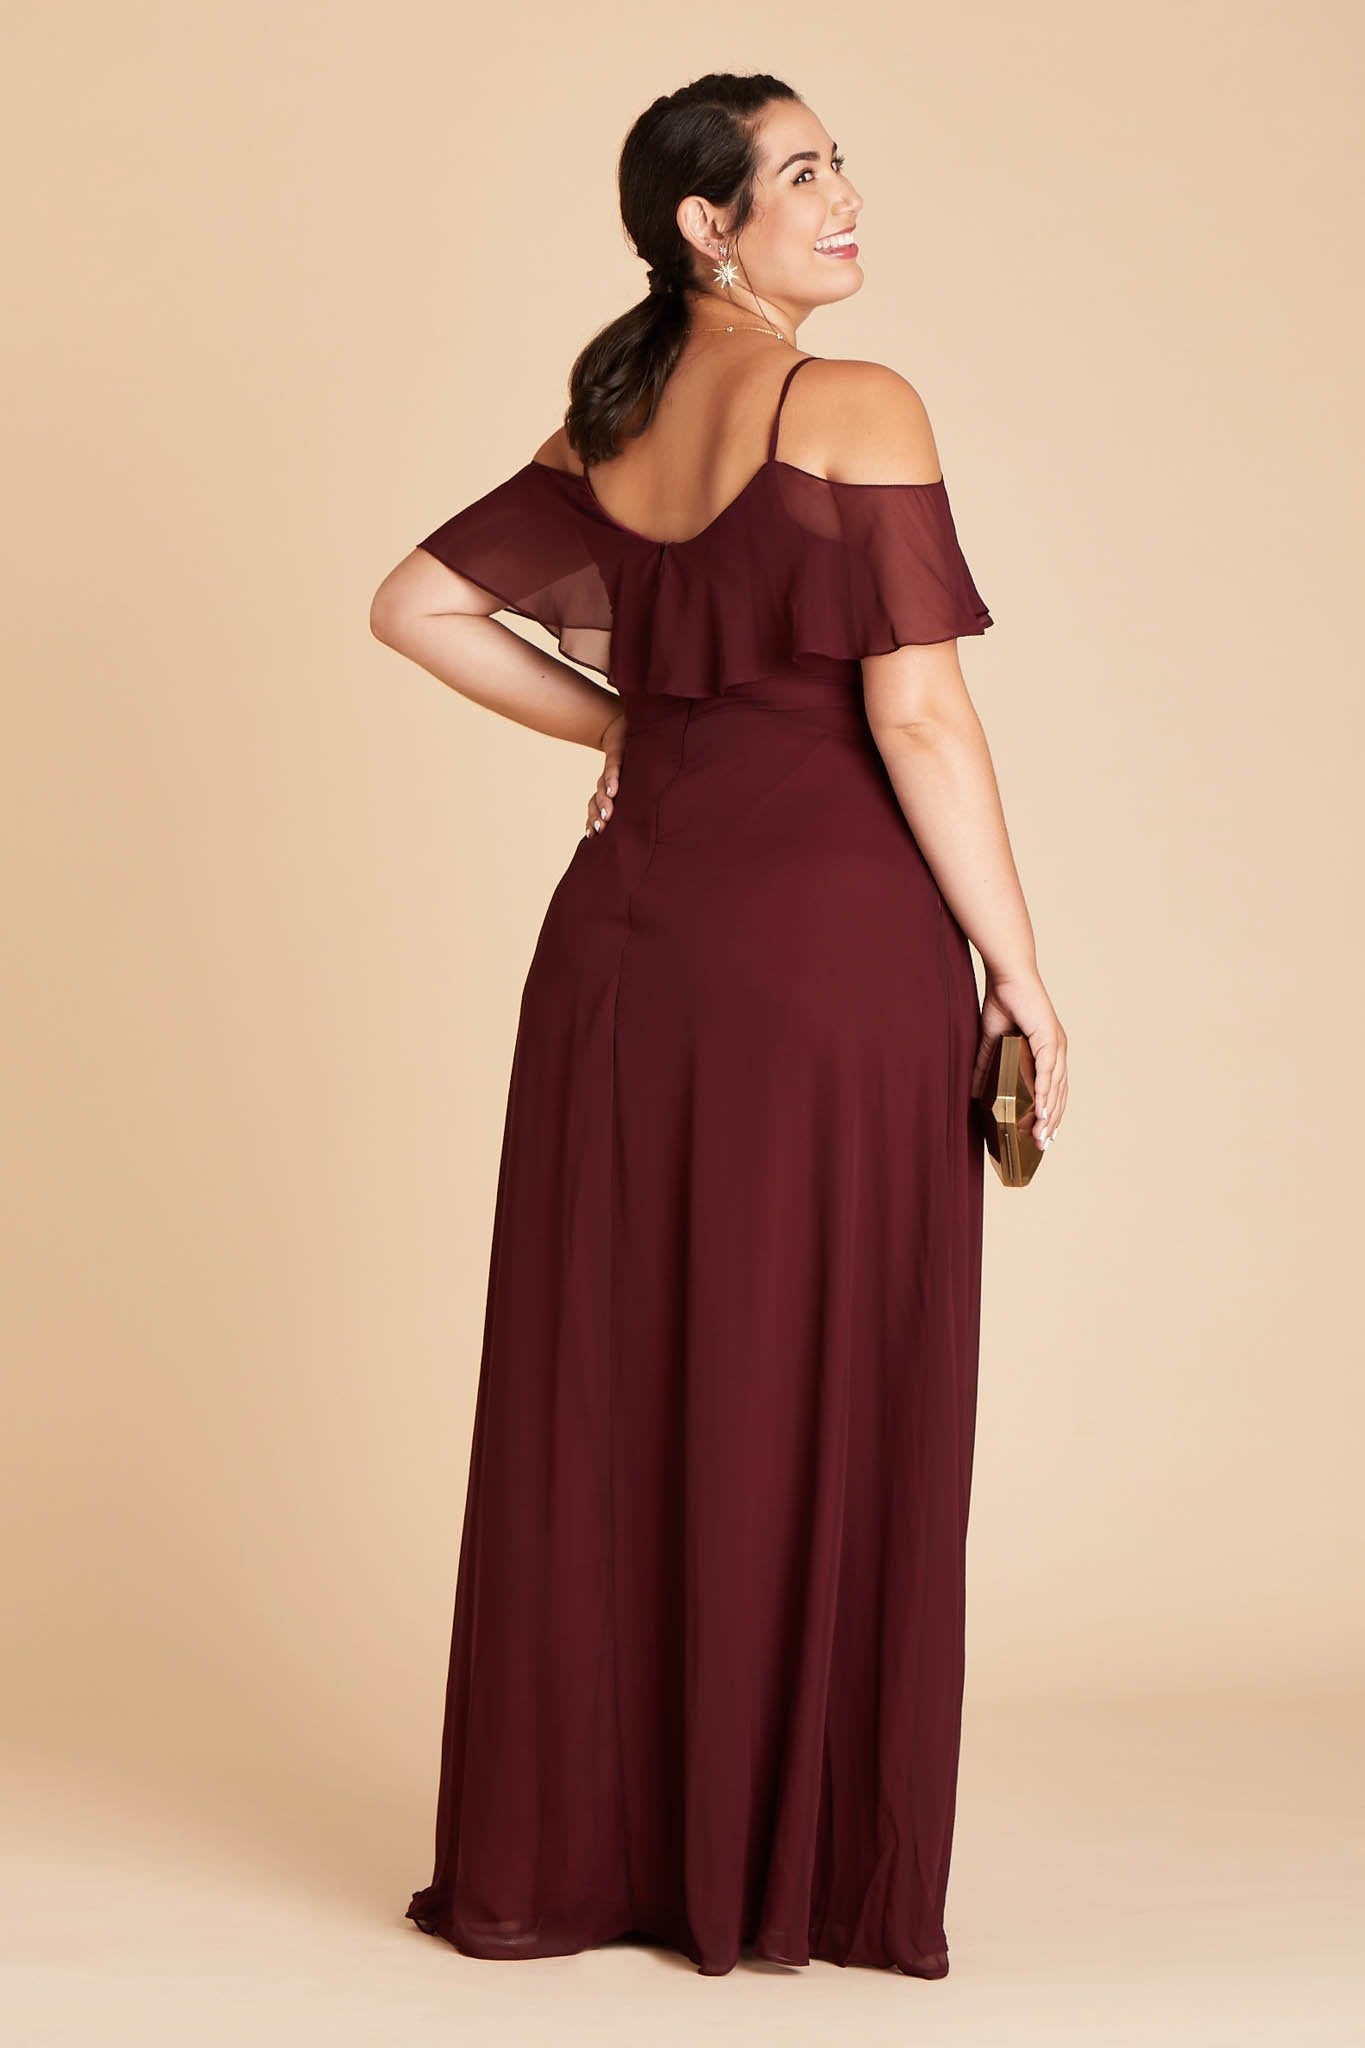 Jane convertible plus size bridesmaid dress in Cabernet Burgundy chiffon by Birdy Grey, back view